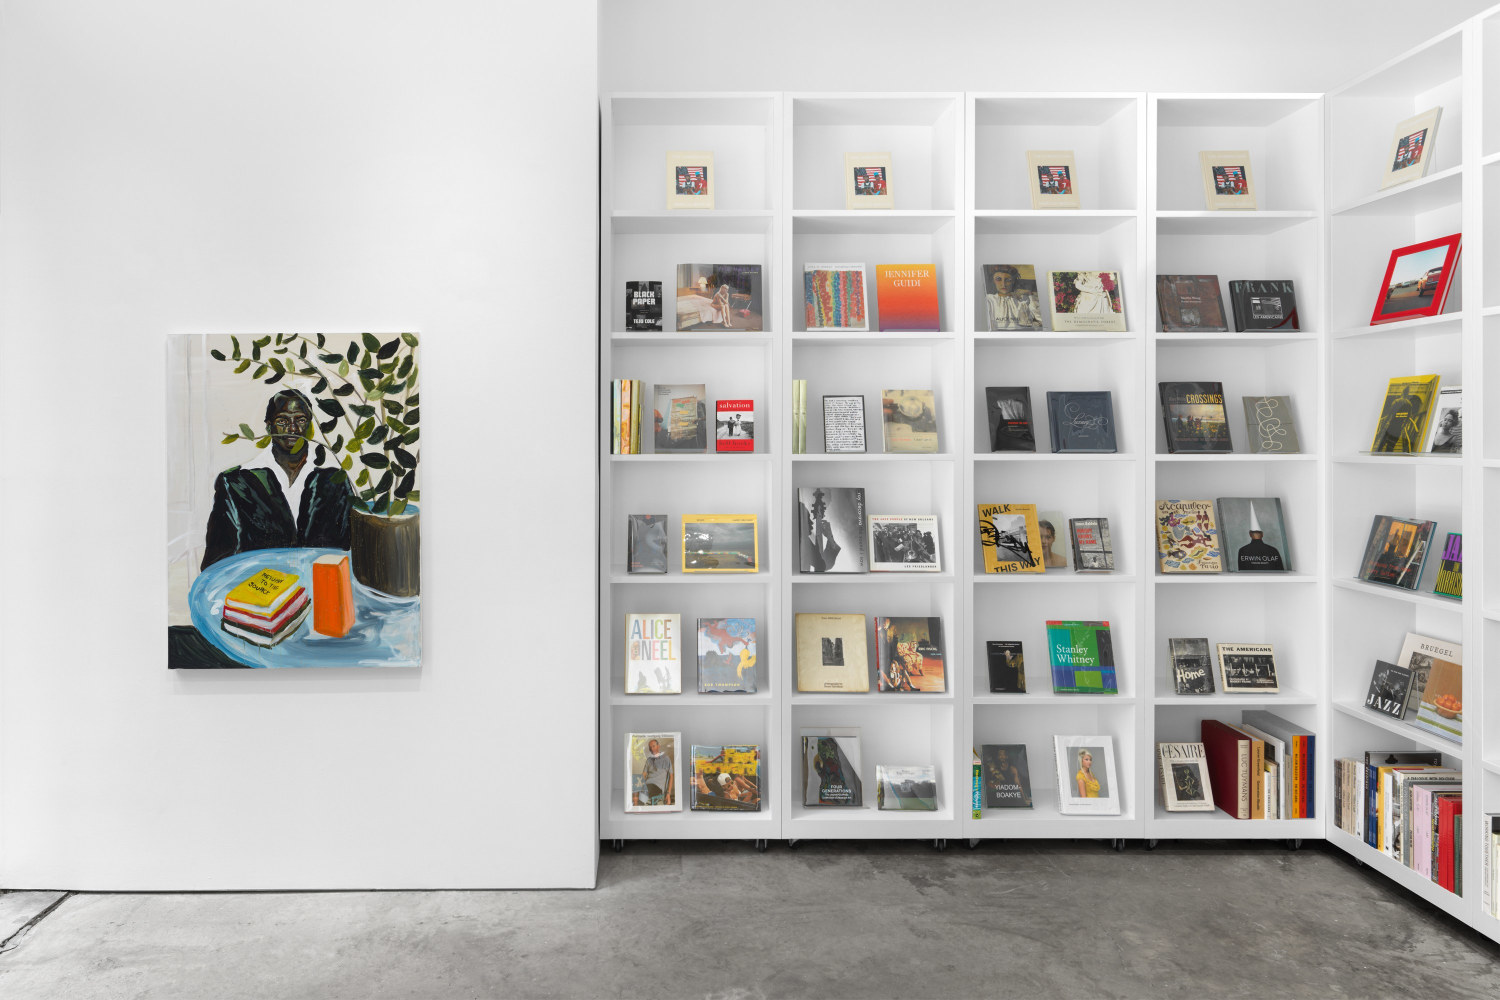 Marcus Brutus: Return to the Source (installation view)